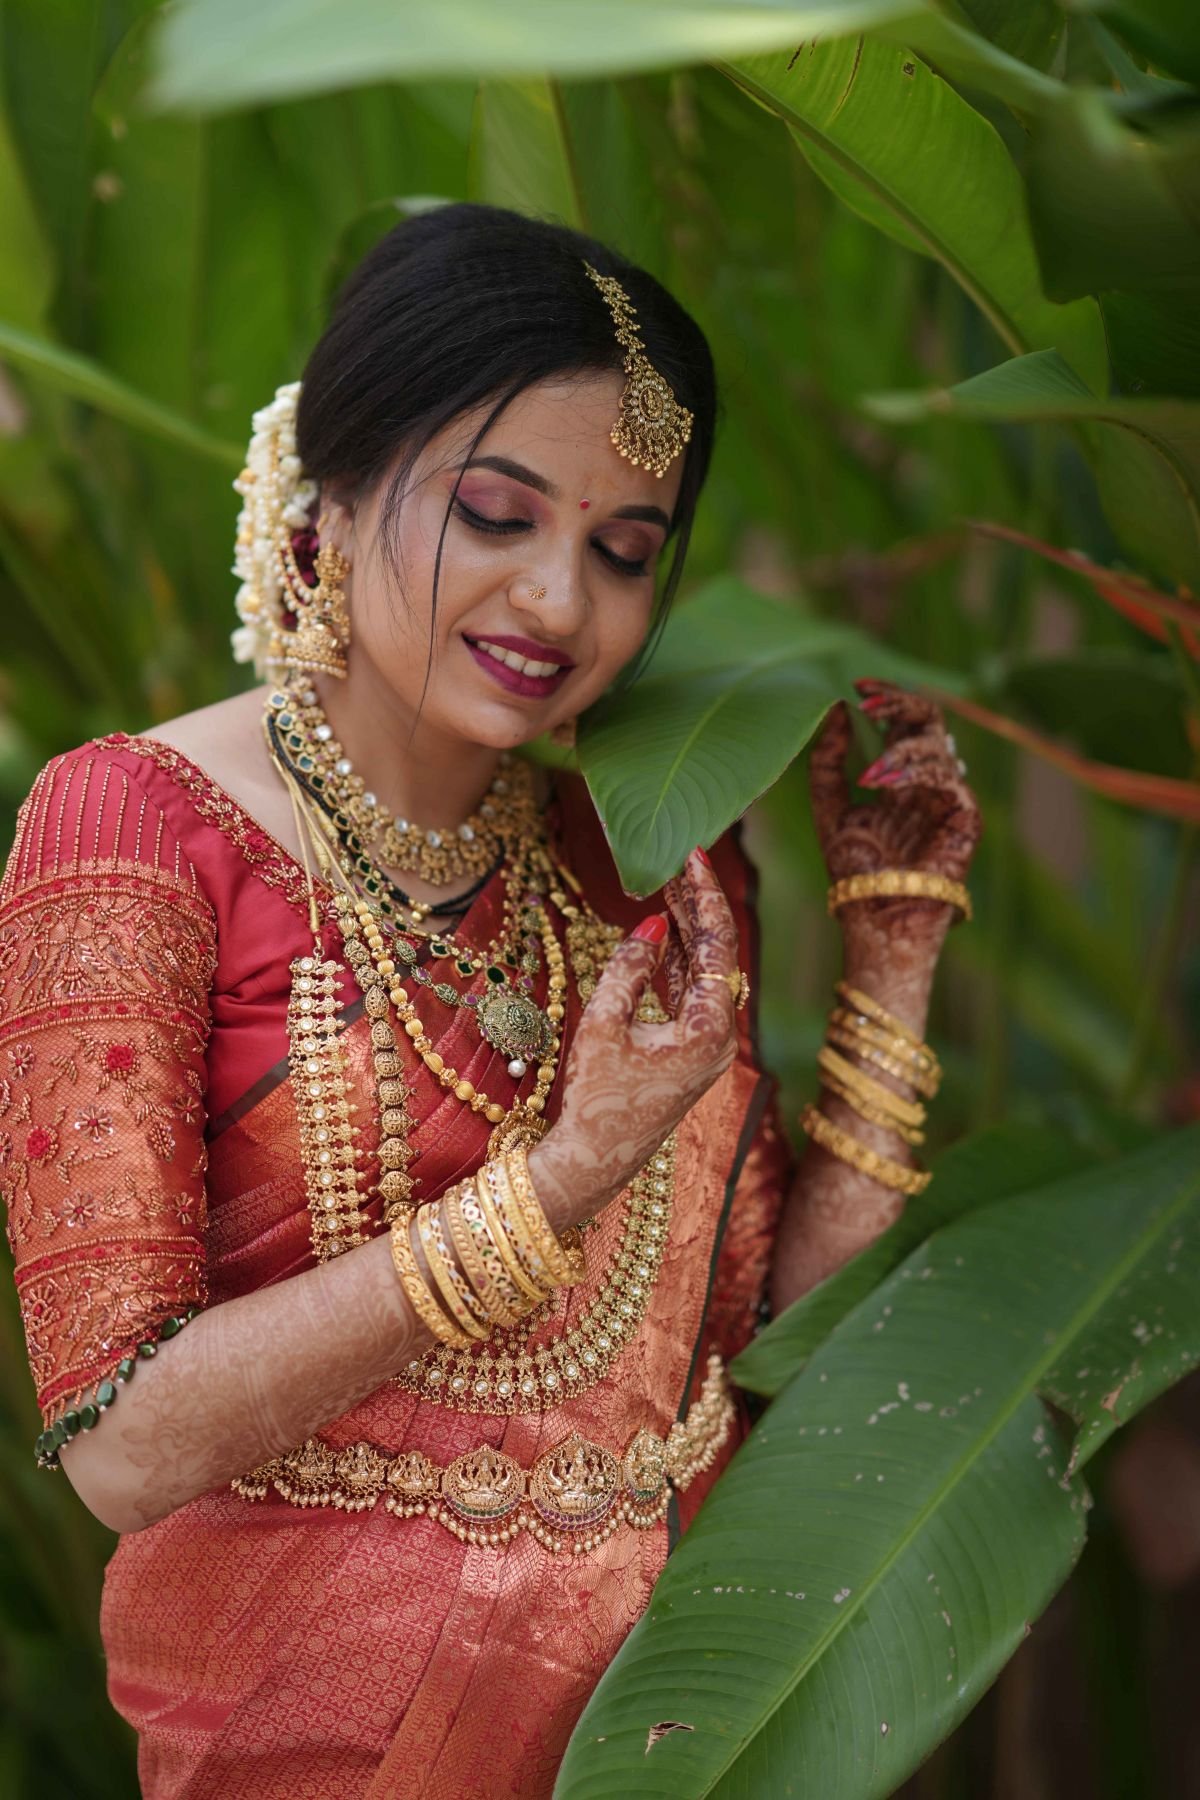 Celebrate Love, Culture, And Tradition In Our Hindu Wedding Ceremony.